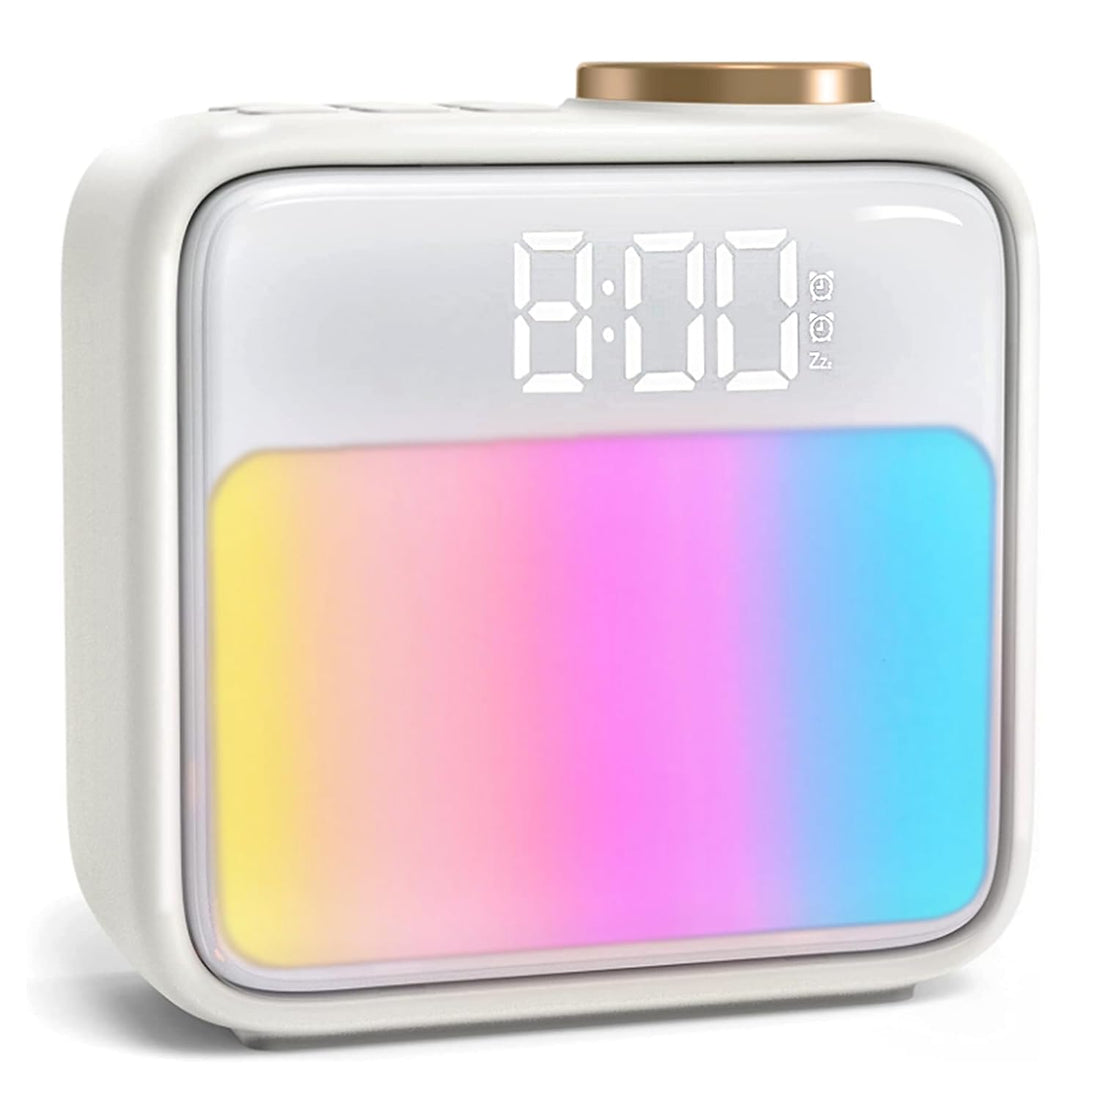 AHNCY Sunrise Alarm Clock Wake up Light for Bedrooms, 6 Dynamic Scene Simulation Light Combine Soothing Sounds & 10 Colors Night Light Dual Alarm Clock Snooze Sleep Aid for Heavy Sleepers Bedside